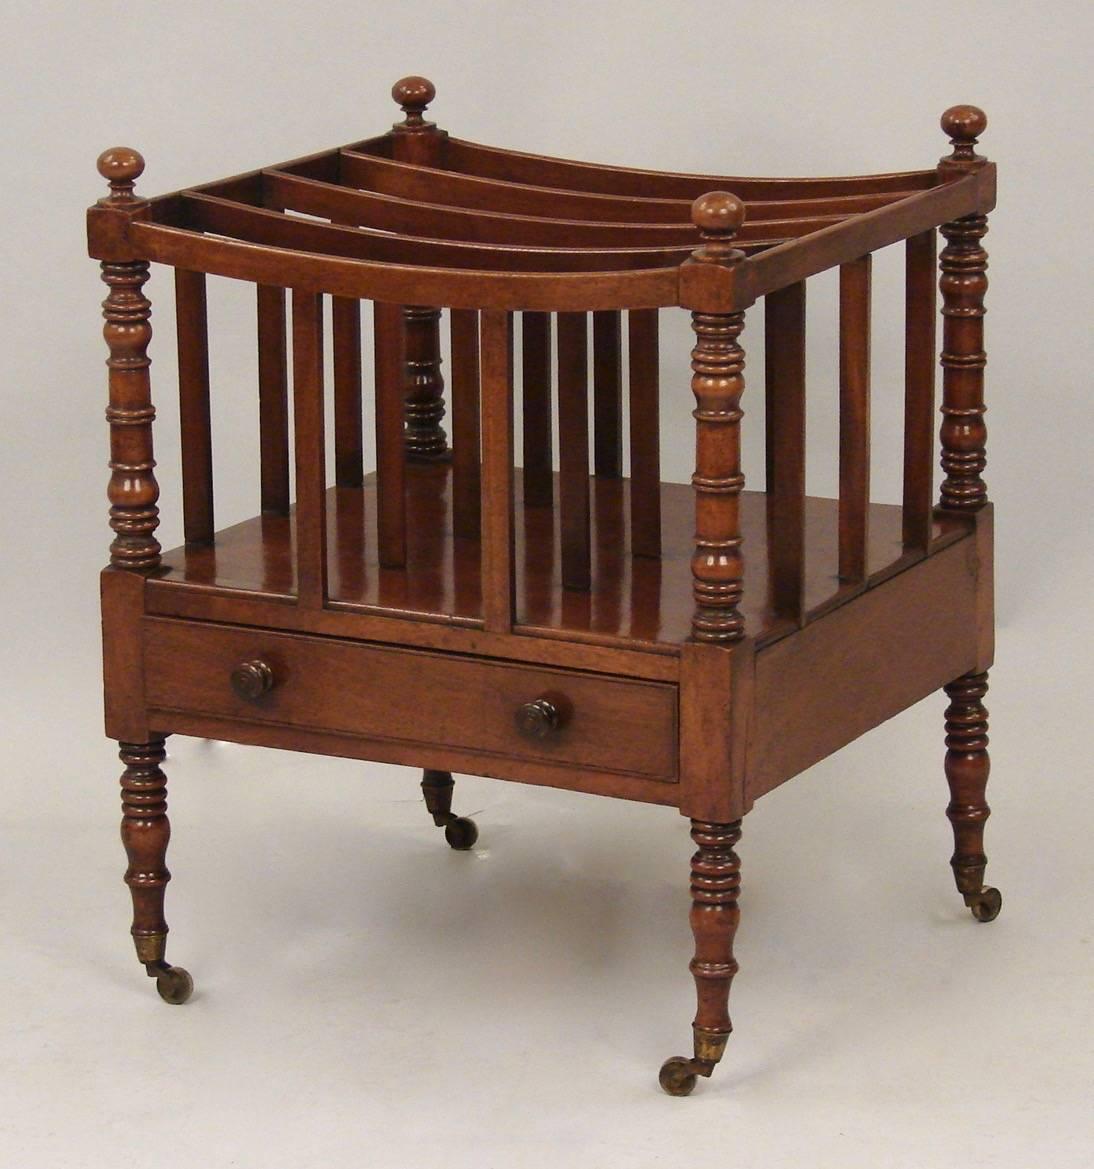 A Regency mahogany four section canterbury with a single drawer, the body with well-turned corner supports, the legs similarly structured and ending in original brass caps and casters, circa 1825-1830.